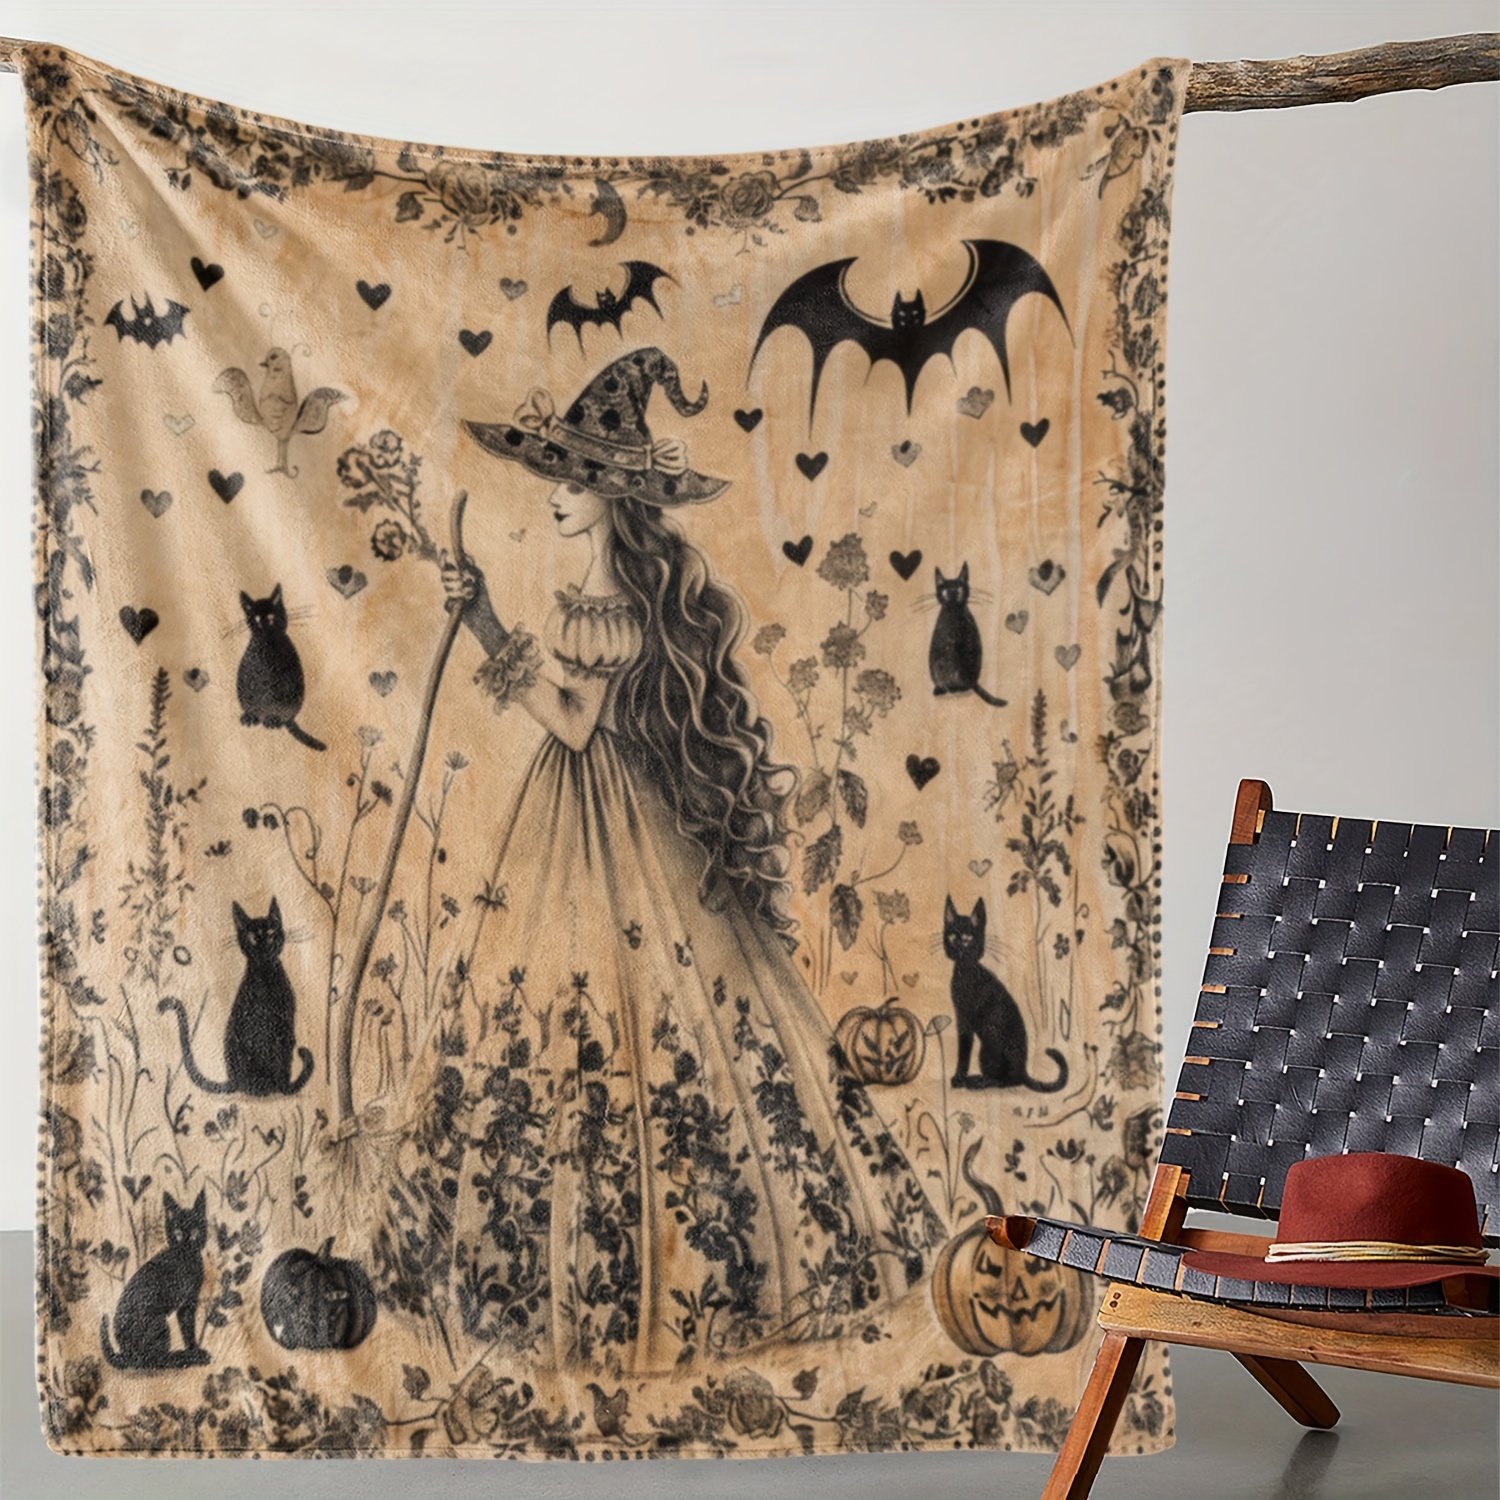 

Vintage Witch And Throw Blanket – Cozy, Soft Flannel All-season Knitted Blanket With Bat Motifs For Couch, Bed, Office, Camping – Digital Print Polyester Fleece, Versatile Gift For All Occasions